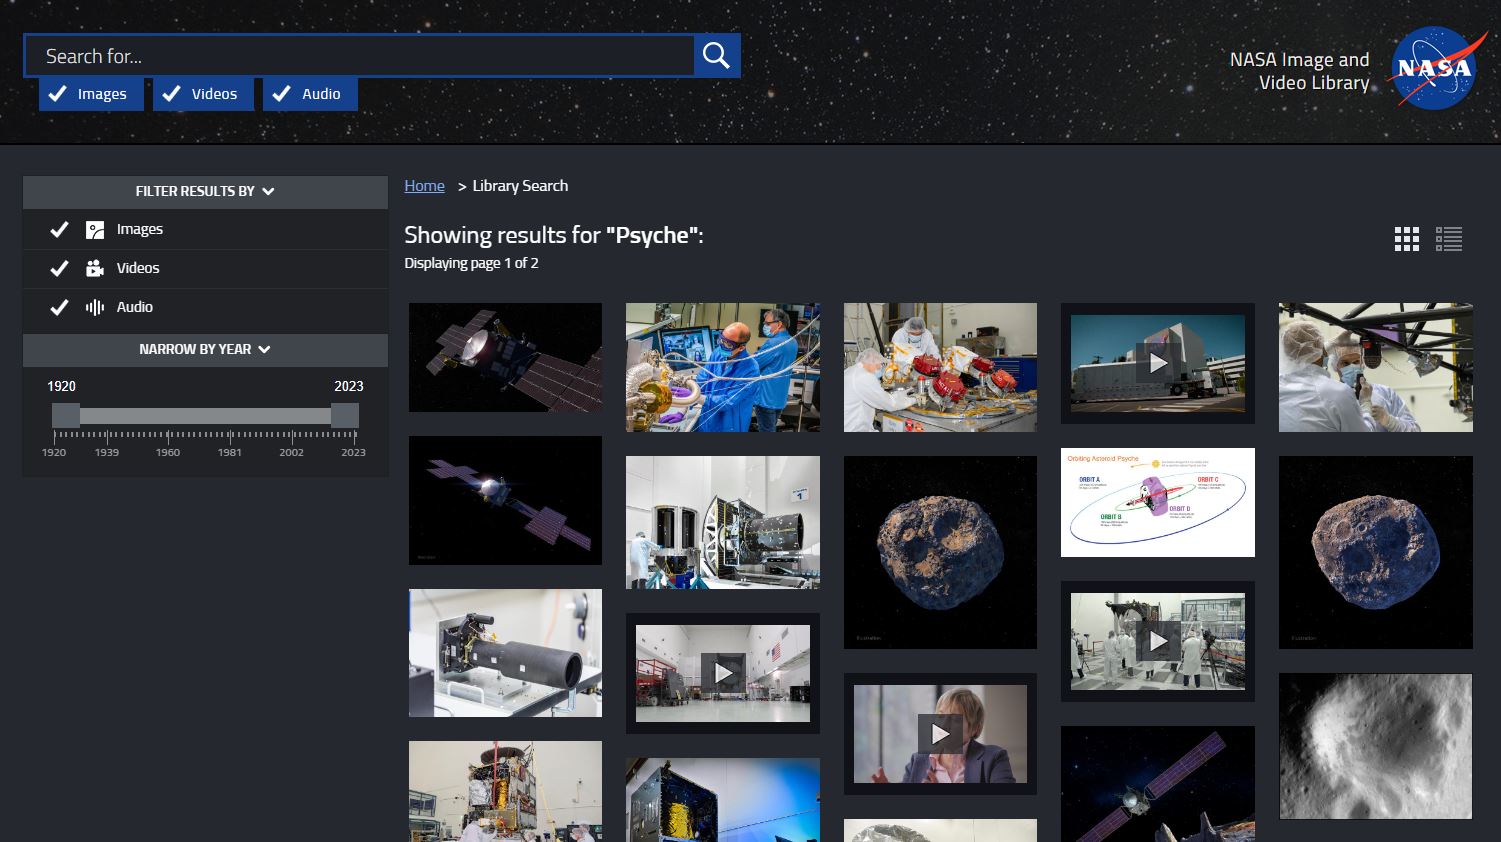 A screengrab from search results for Psyche in NASA's image and video library. It shows boxes checked for images, videos and audio and has small images for each open. The images are displayed in a grid.